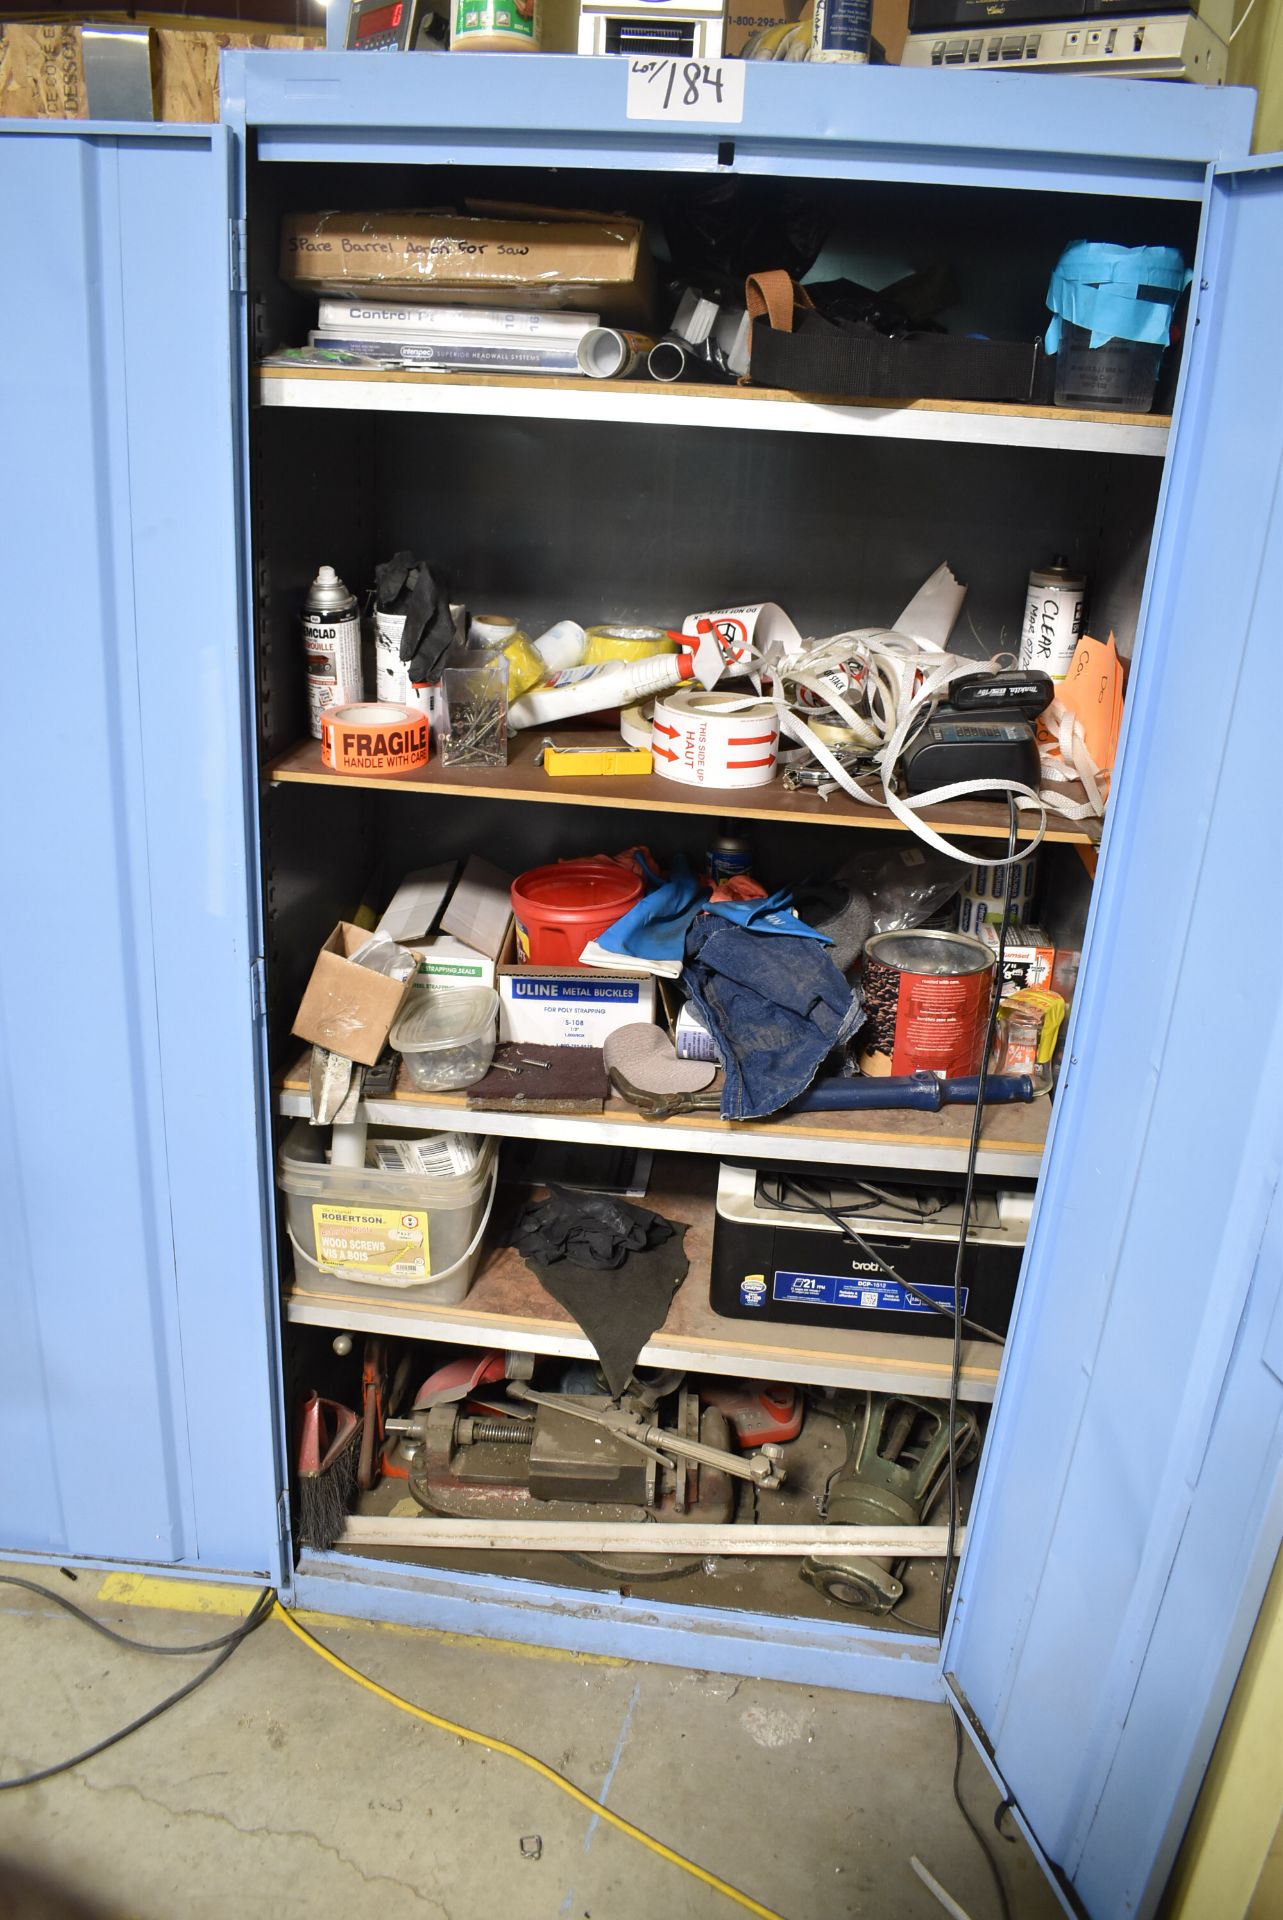 LOT/ HIGH BOY CABINET WITH CONTENTS [RIGGING FOR FOR LOT #184 - $25 CAD PLUS APPLICABLE TAXES]